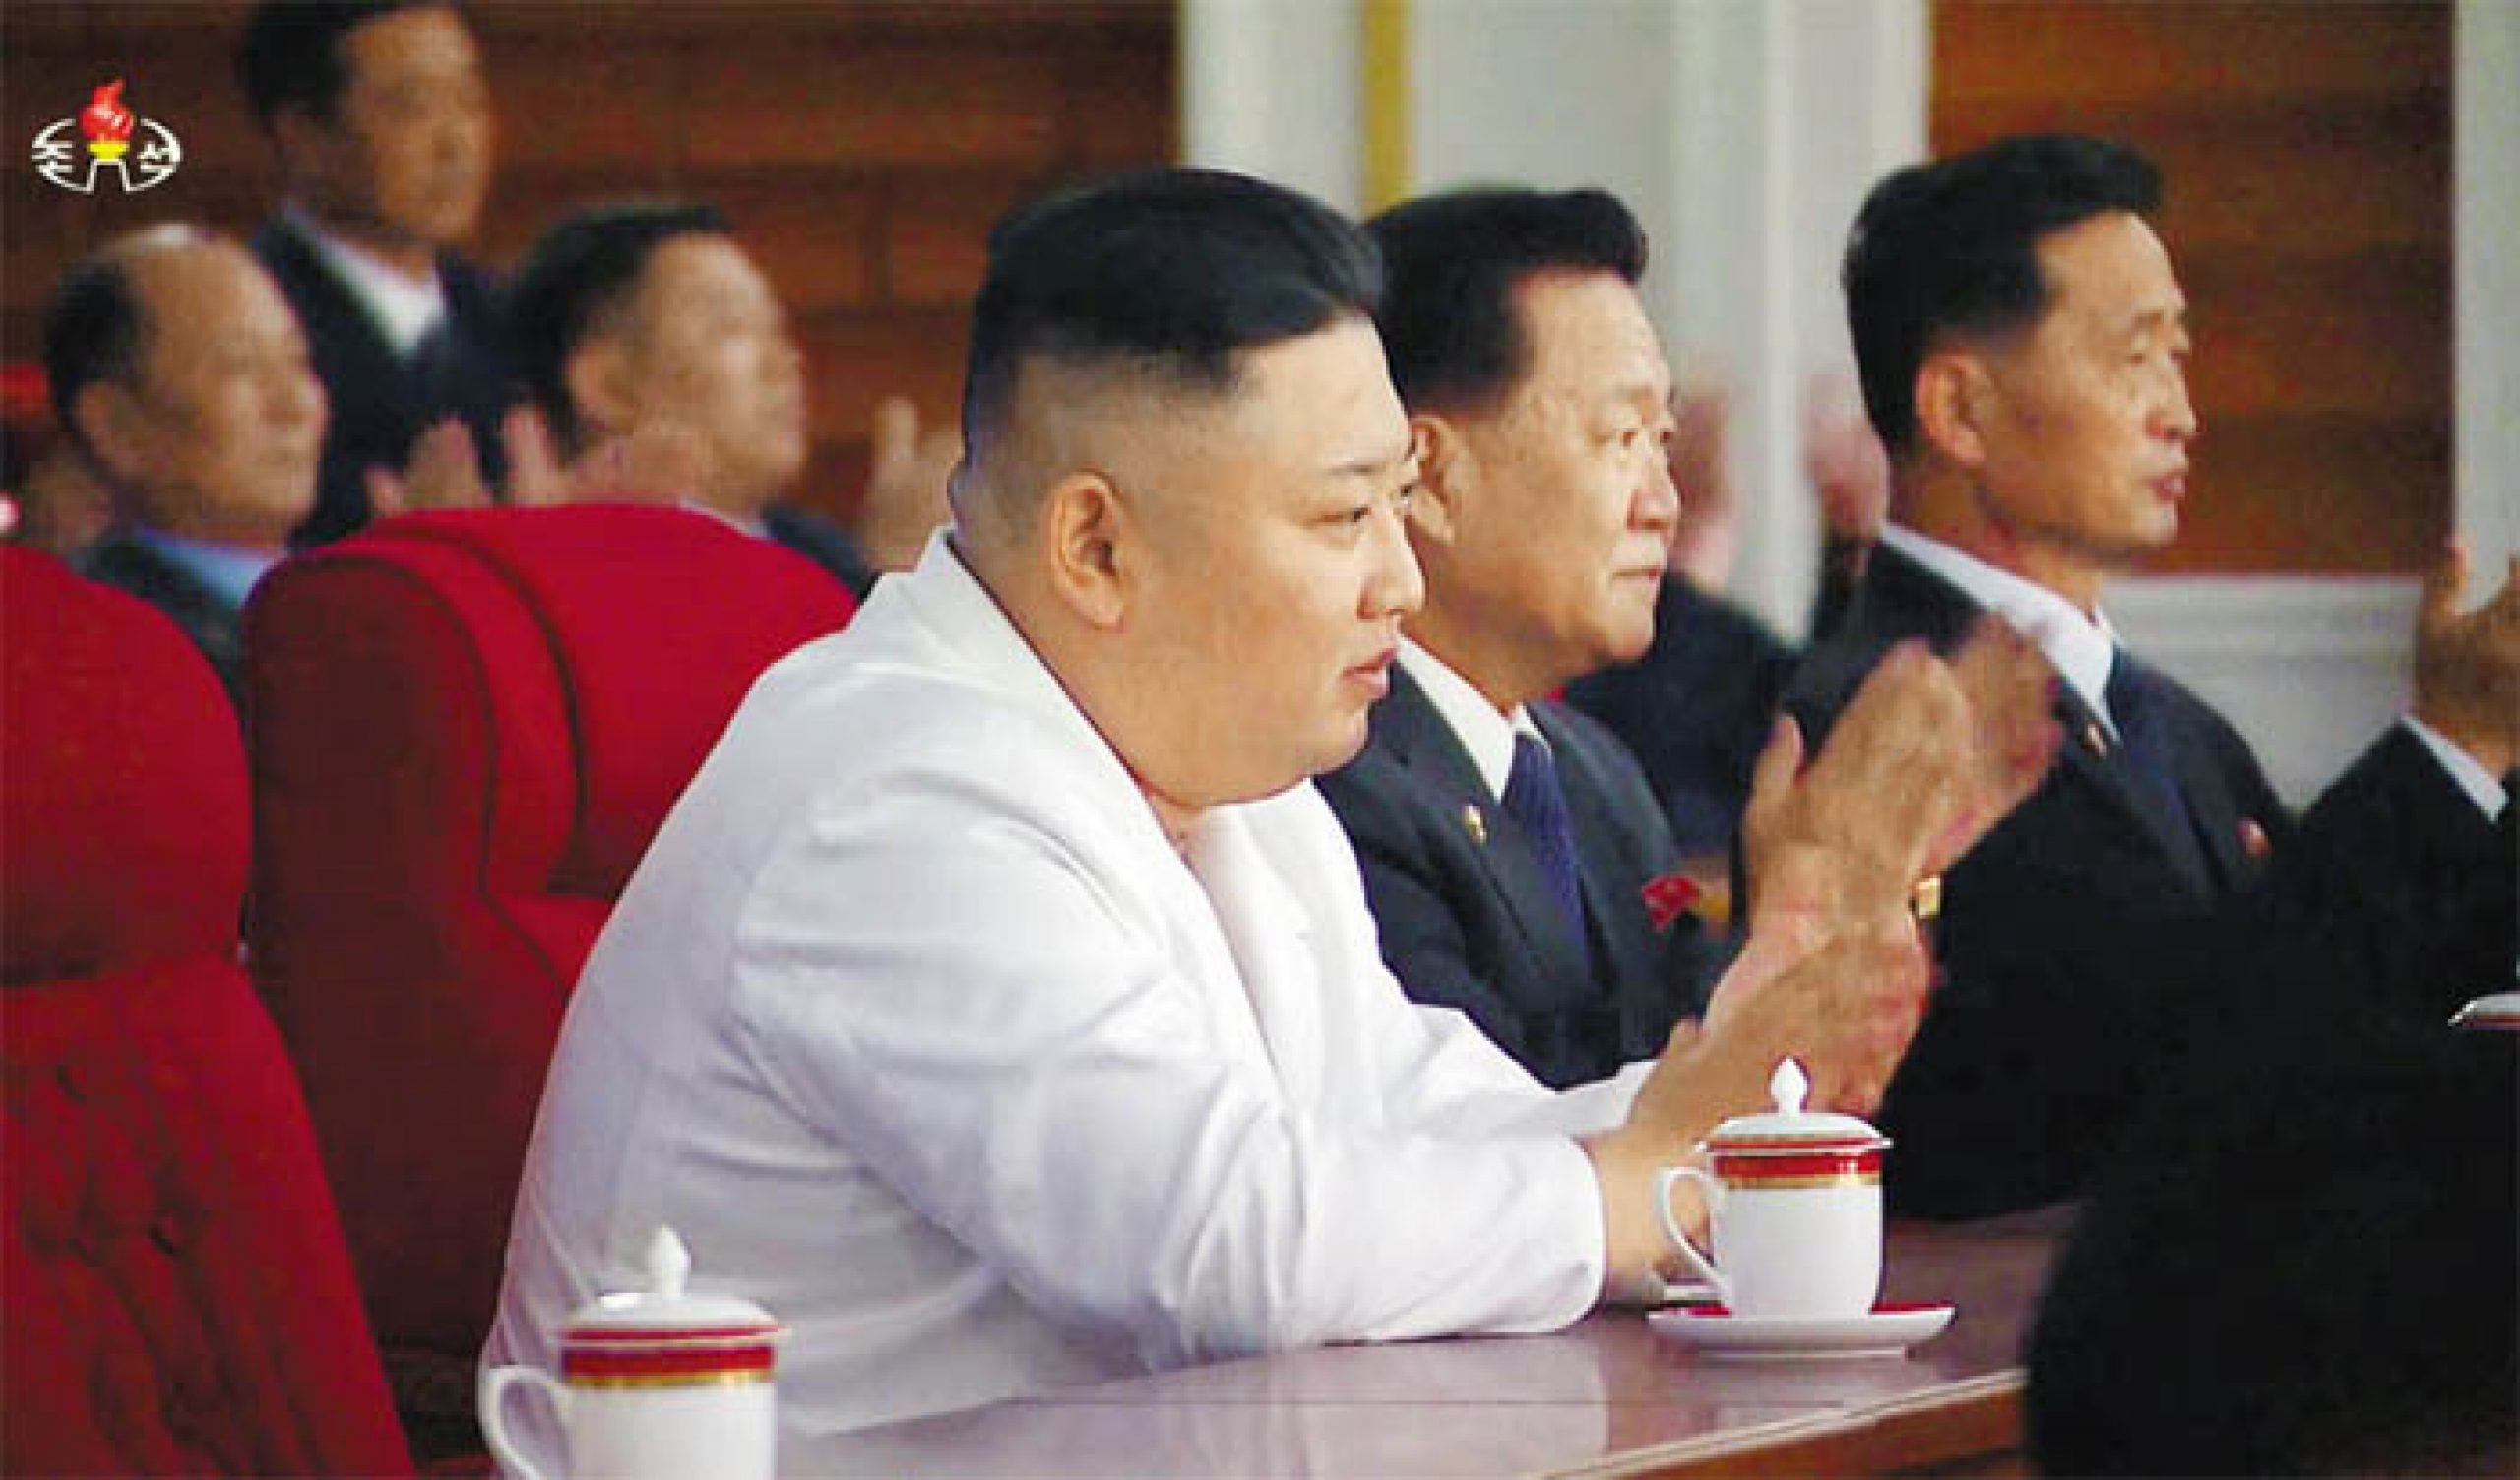 Aides ‘Begged Kim Jong-un to Lose Weight’